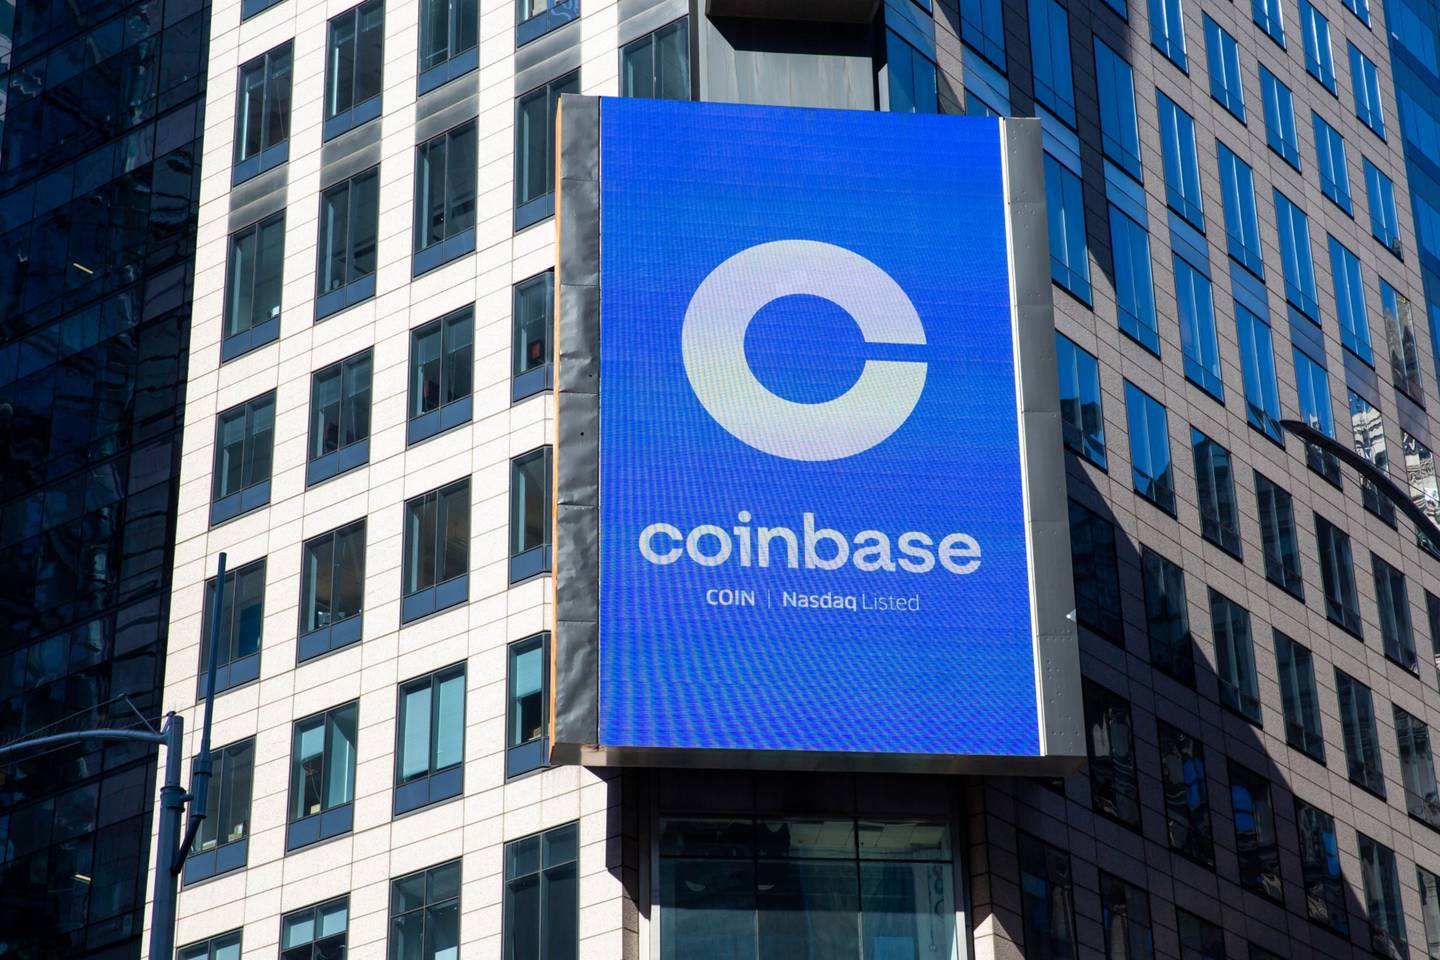 A monitor displays Coinbase signage during the company's initial public offering (IPO) at the Nasdaq MarketSite in New York, on April 14, 2021.